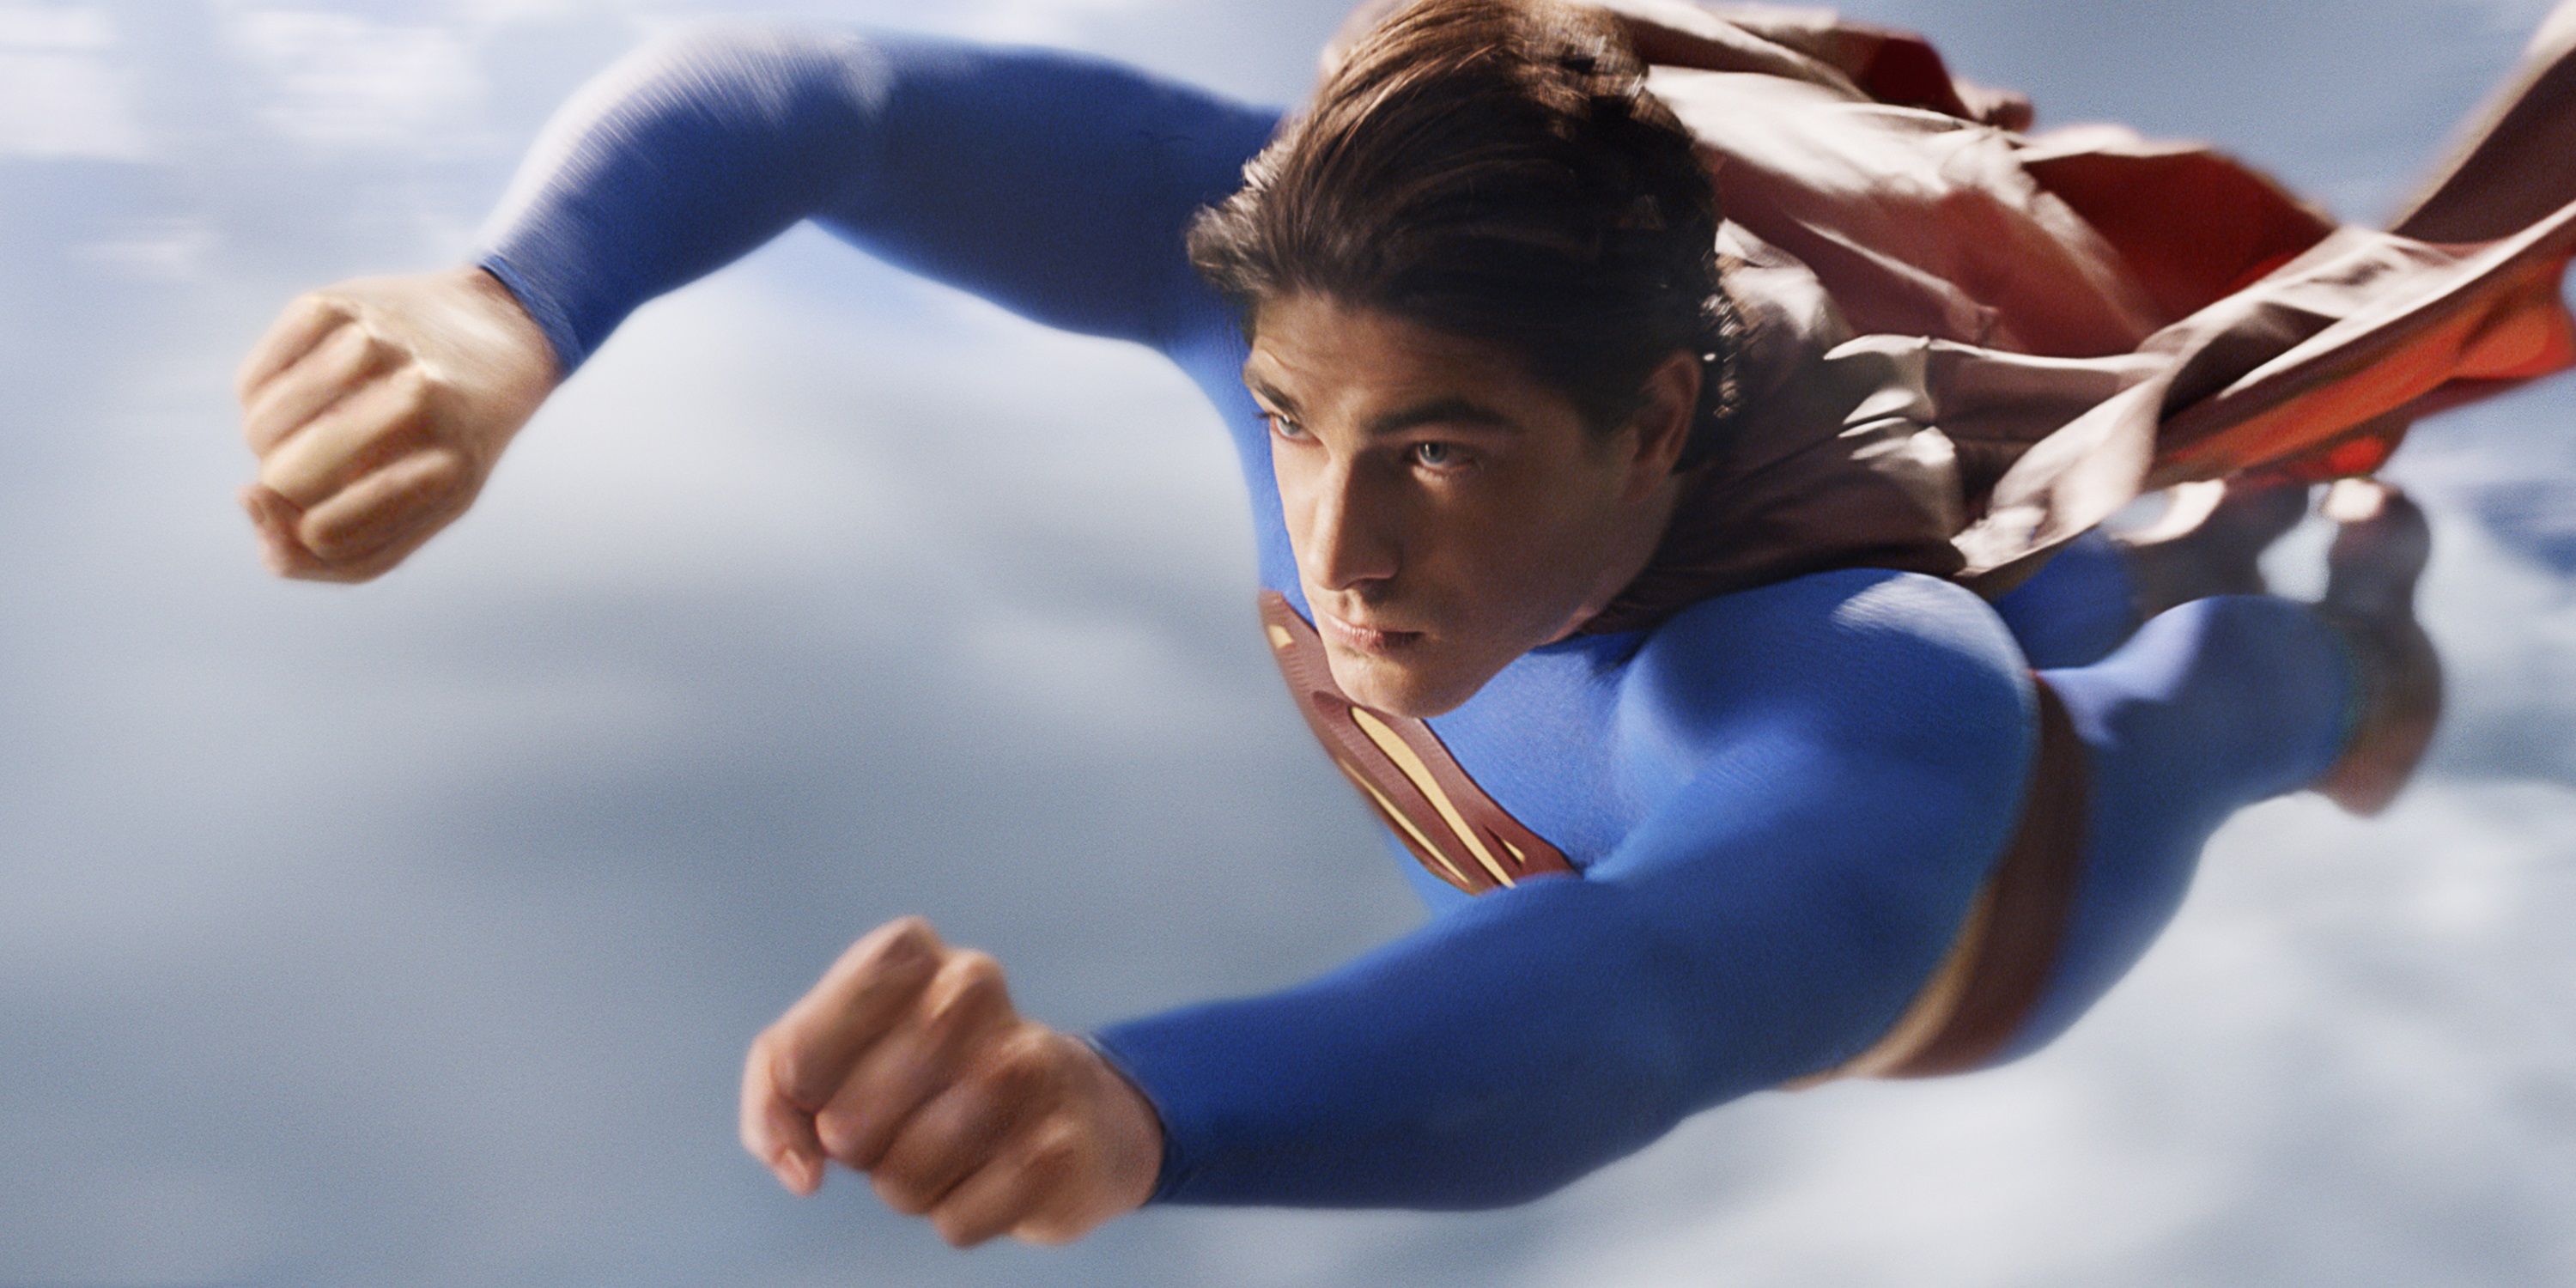 Brandon Routh as Superman flying in Superman Returns (2006)